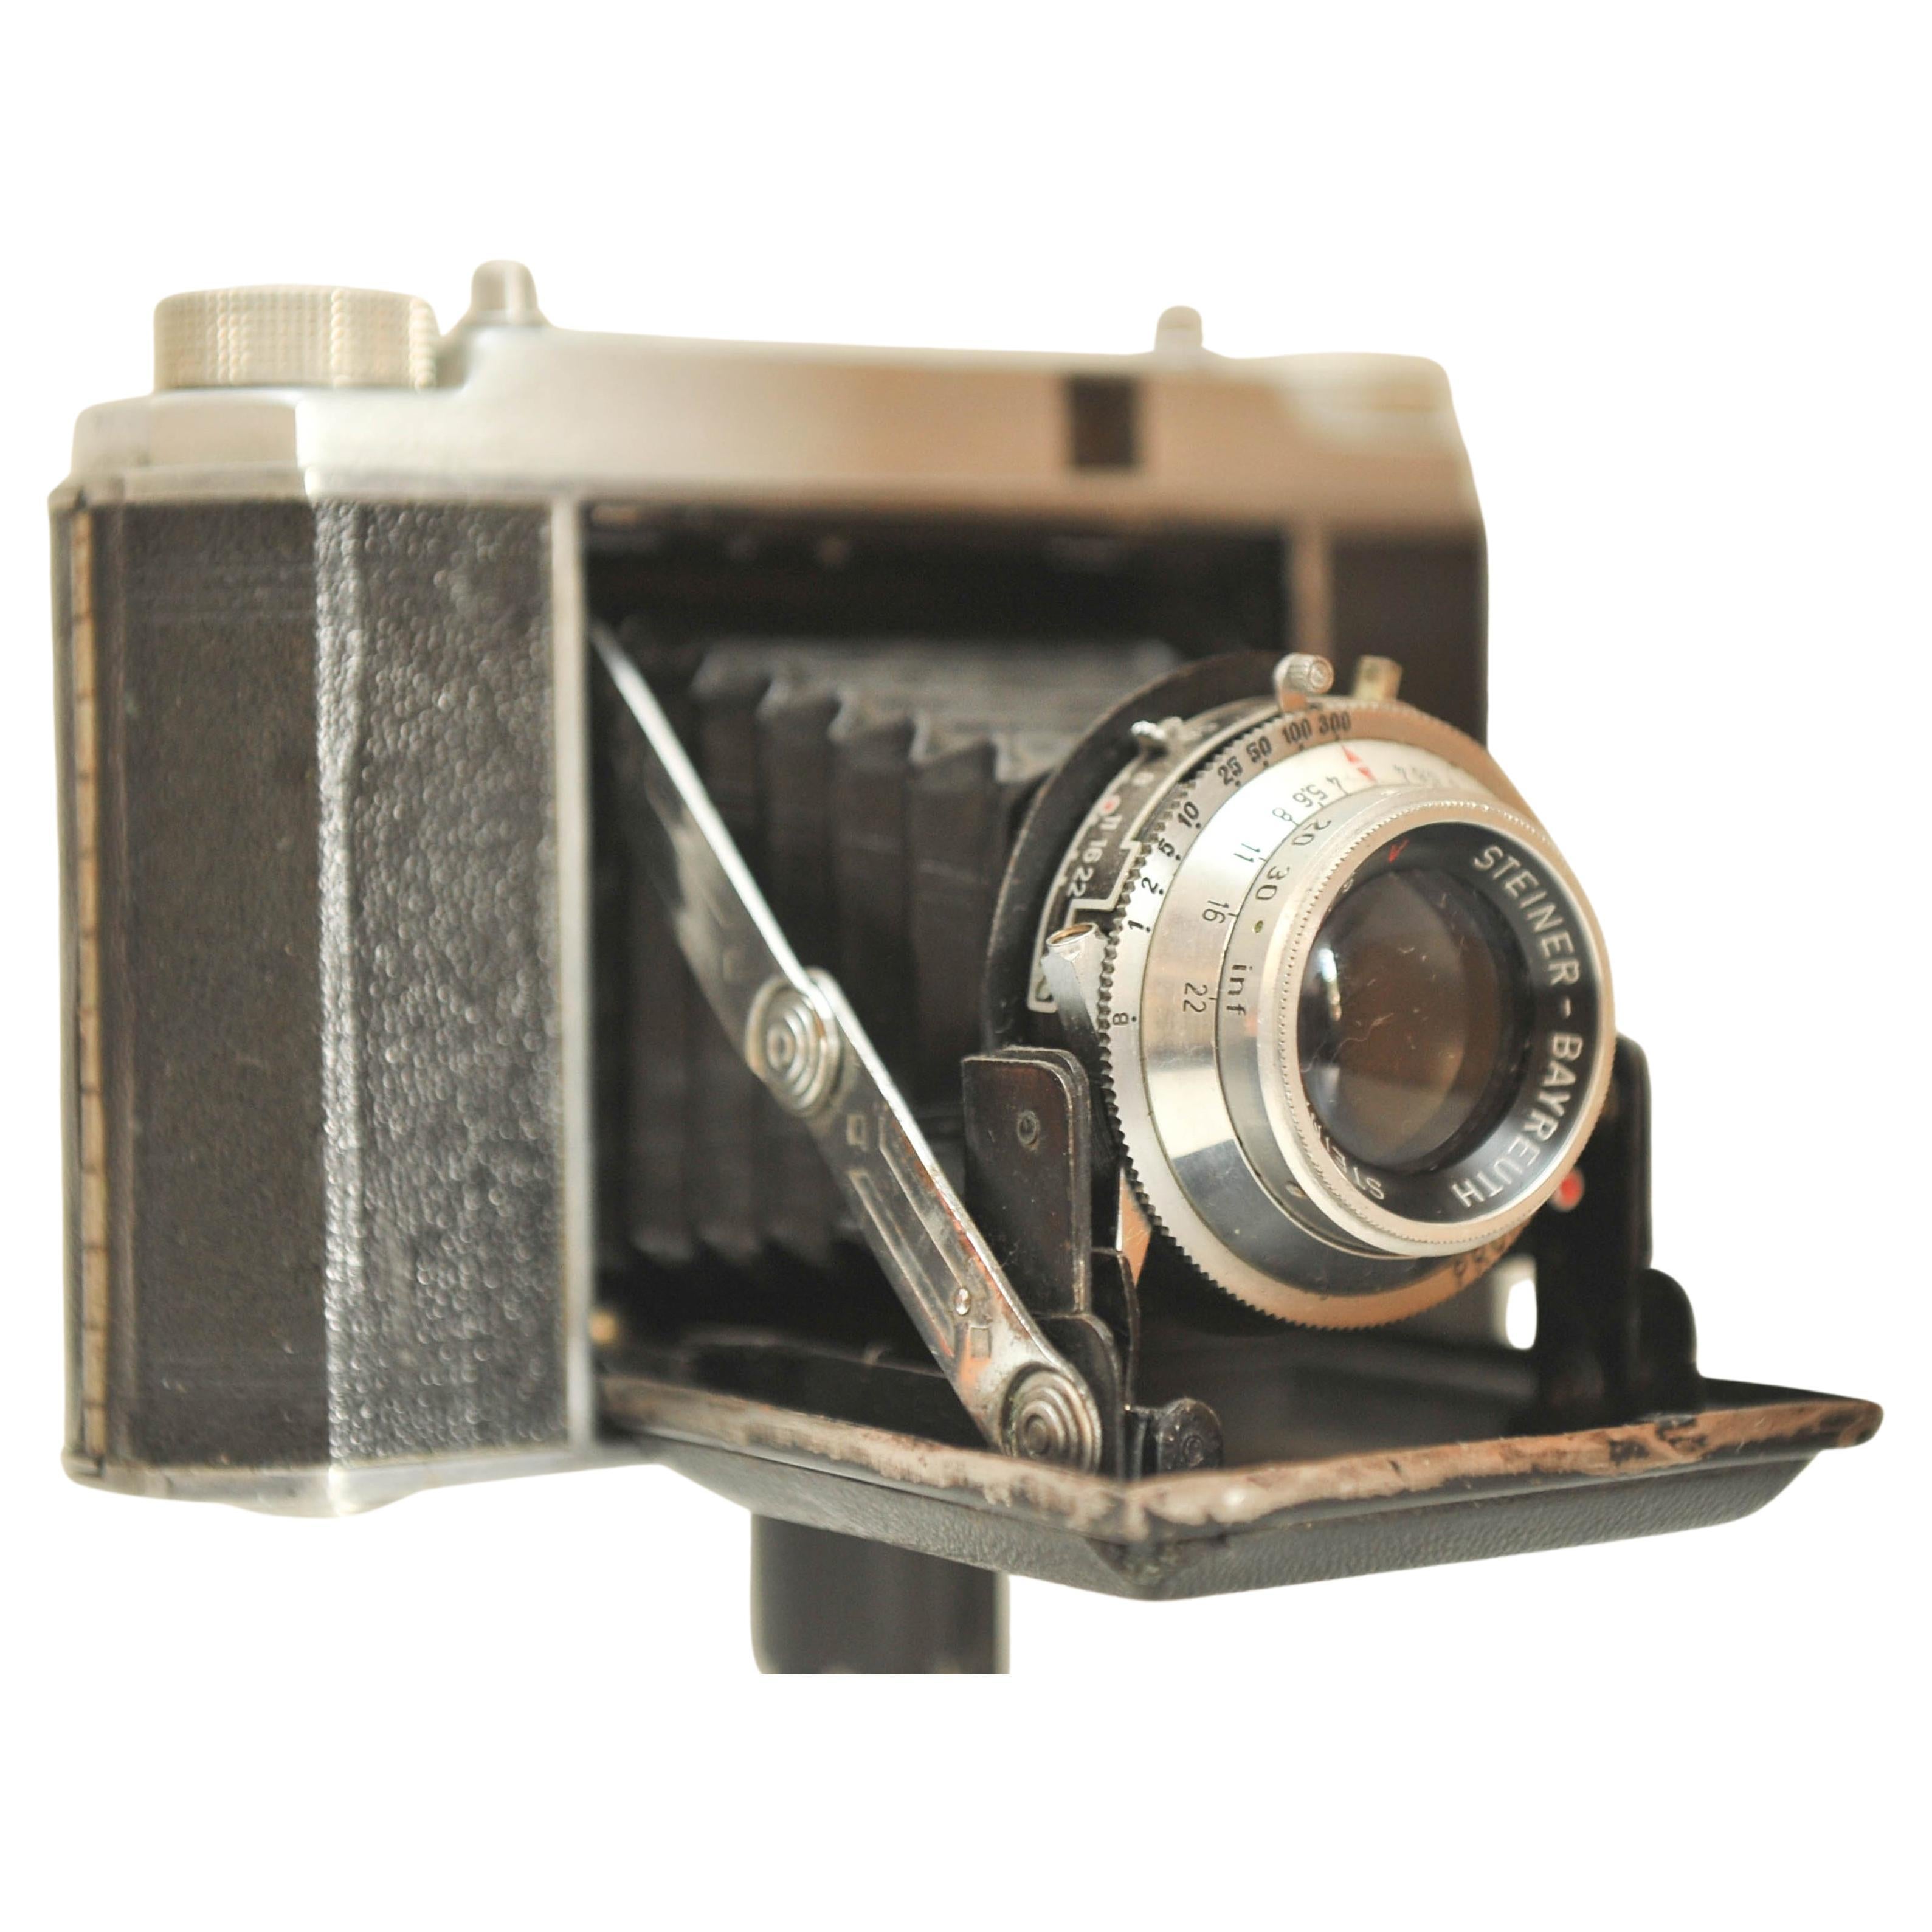 Rare Foitzik Trier Unca 120 Roll Film Bellow Camera Made in Germany 1952  For Sale